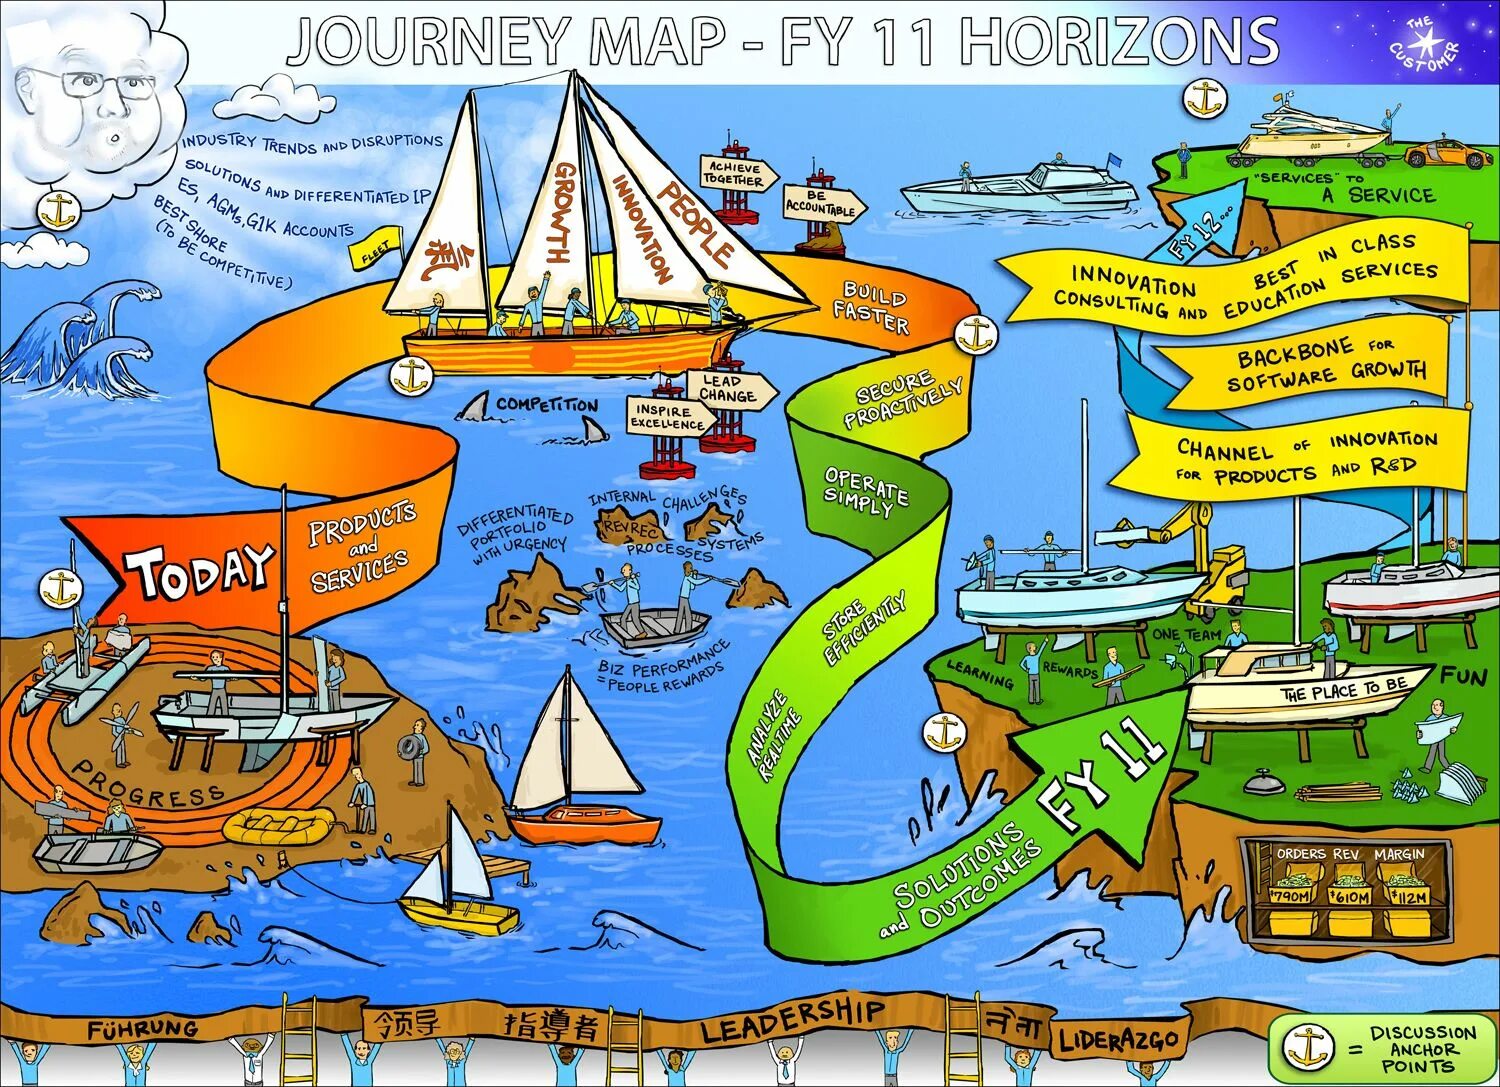 Learning maps. Learning Journey Map. Journey of Life карта. Plan your own Journey on the Map of the World 5 класс Вербицкая. Journey around cartoon English.